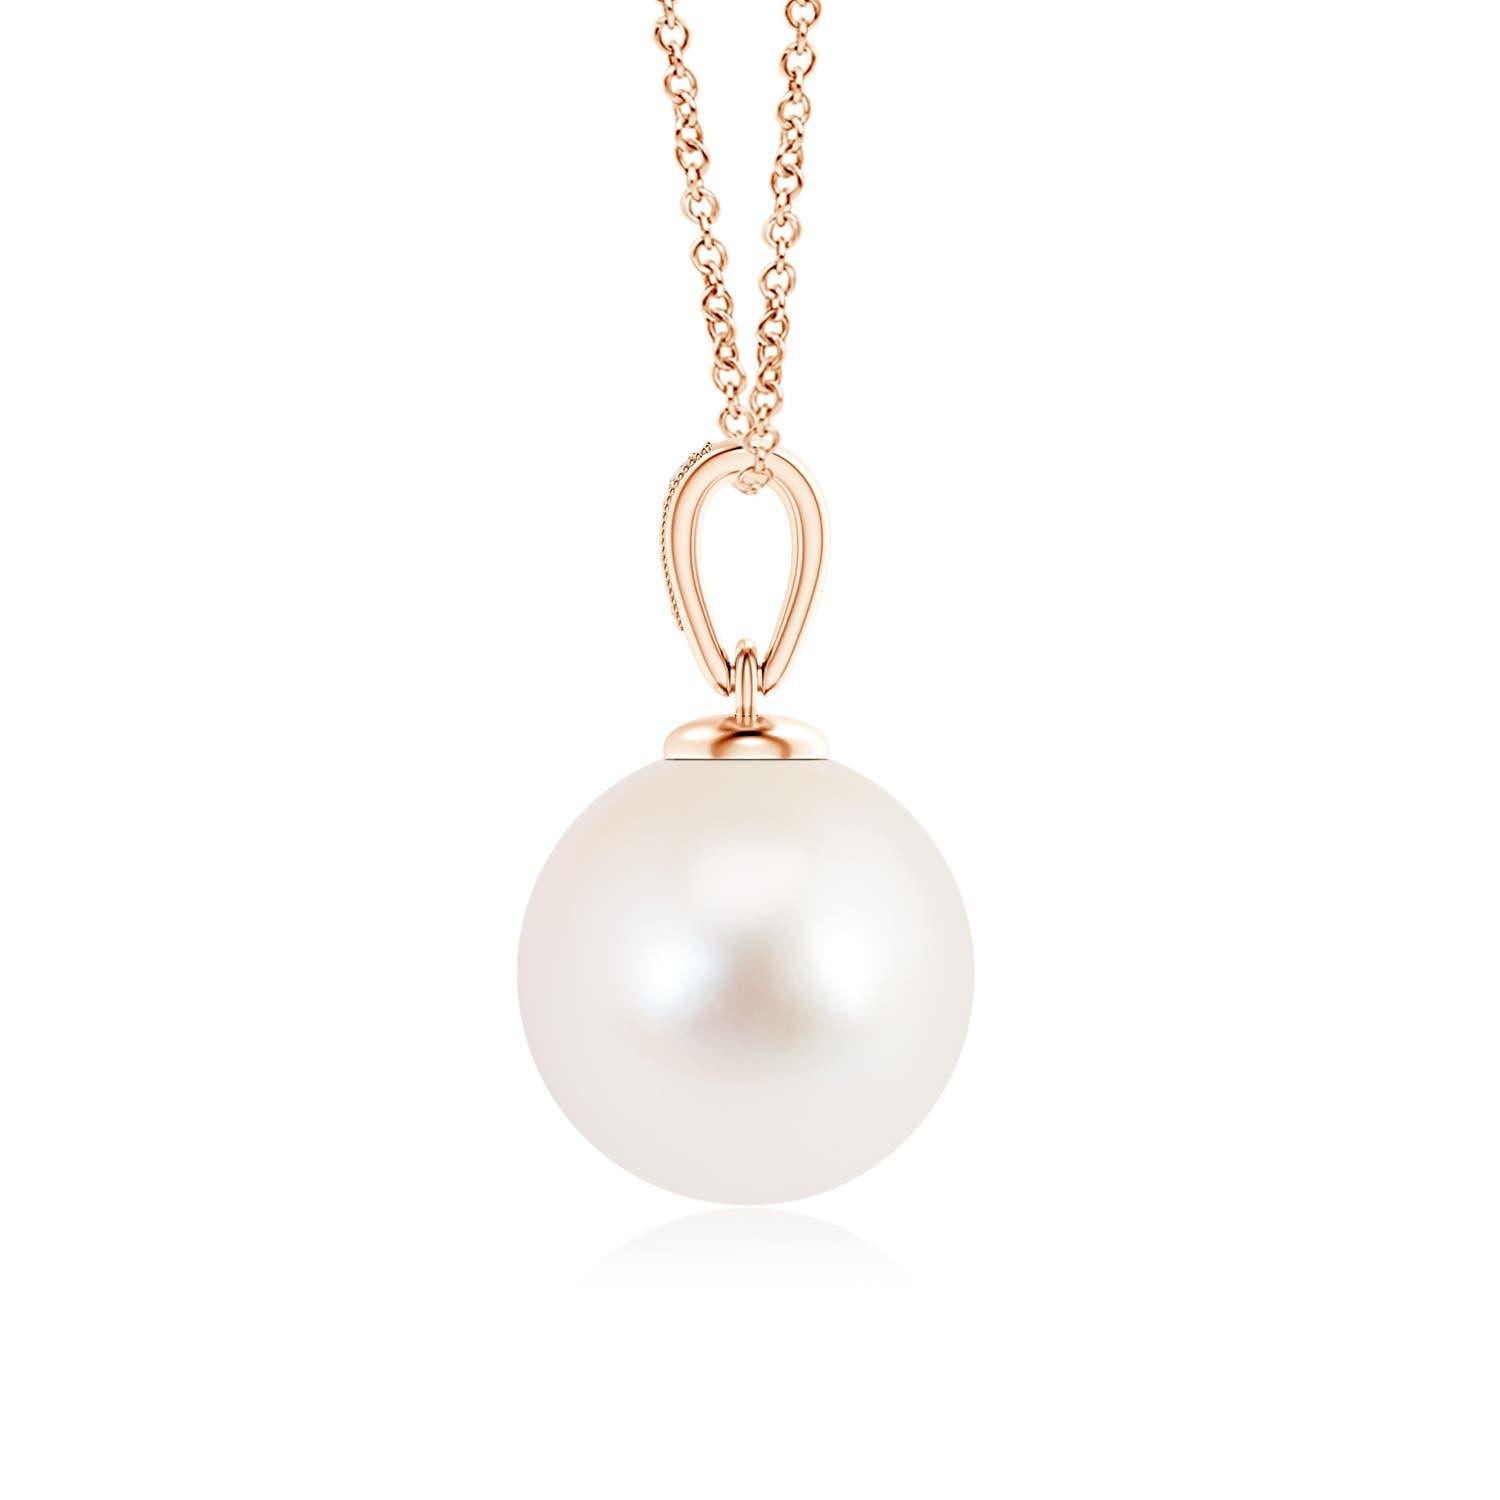 This 14K rose gold solitaire pearl pendant offers a simple yet elegant look. The diamonds pavÃ© set on the bale offer a glittering effect to the lustrous pearl, while the milgrain detail on the bale lends a slight vintage touch. You can flaunt a